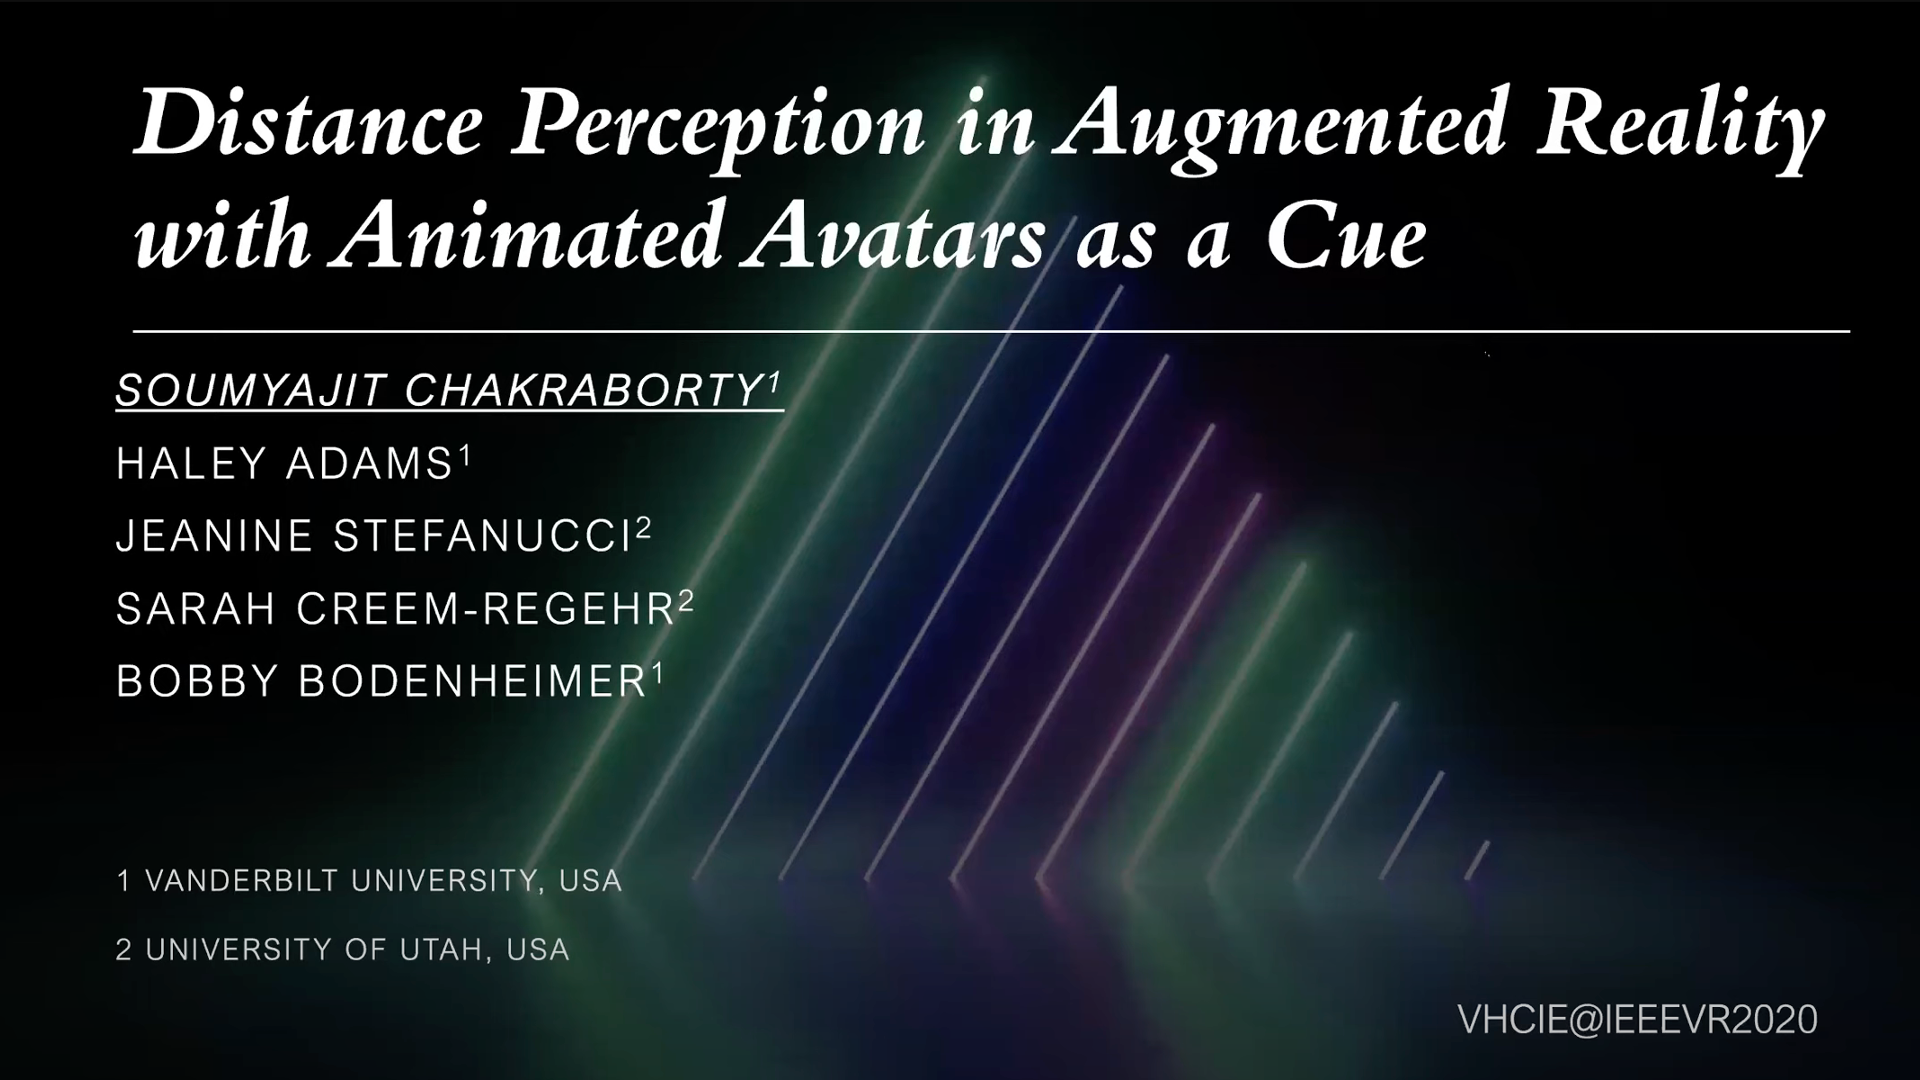 Distance Perception in Augmented Reality with Animated Avatars as a Cue